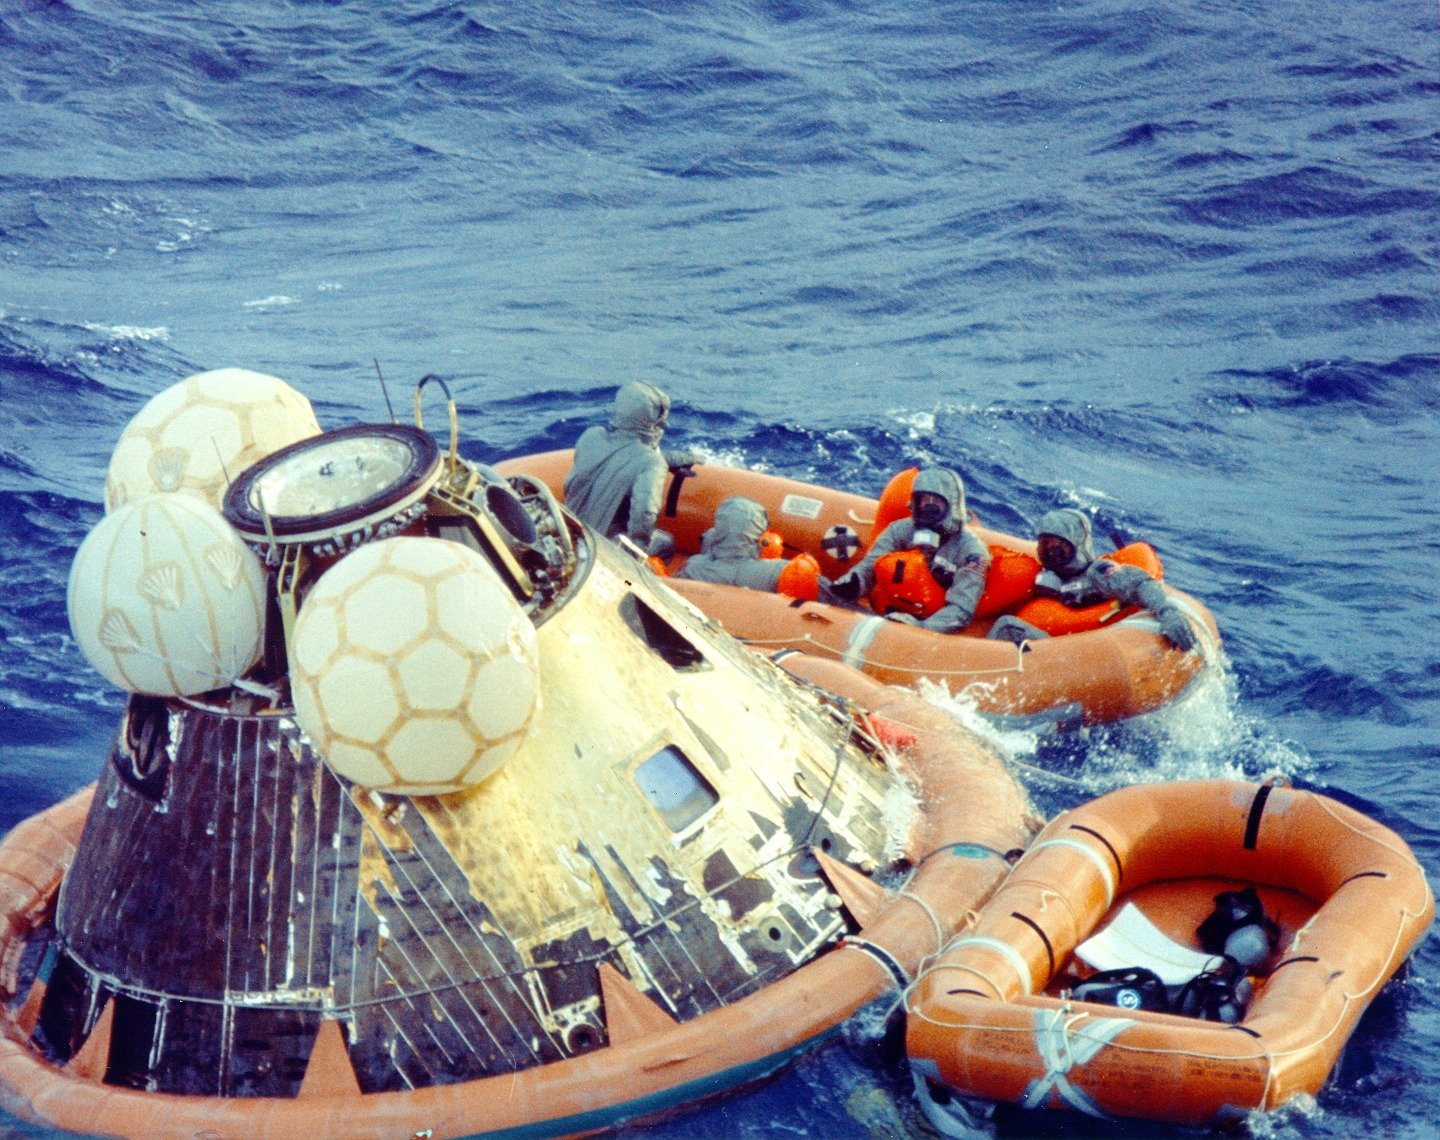 The Apollo 11 command module recovered by U.S. Navy personnel after the spacecraft&#8217;s splashdown in the Pacific Ocean on July 24, 1969.